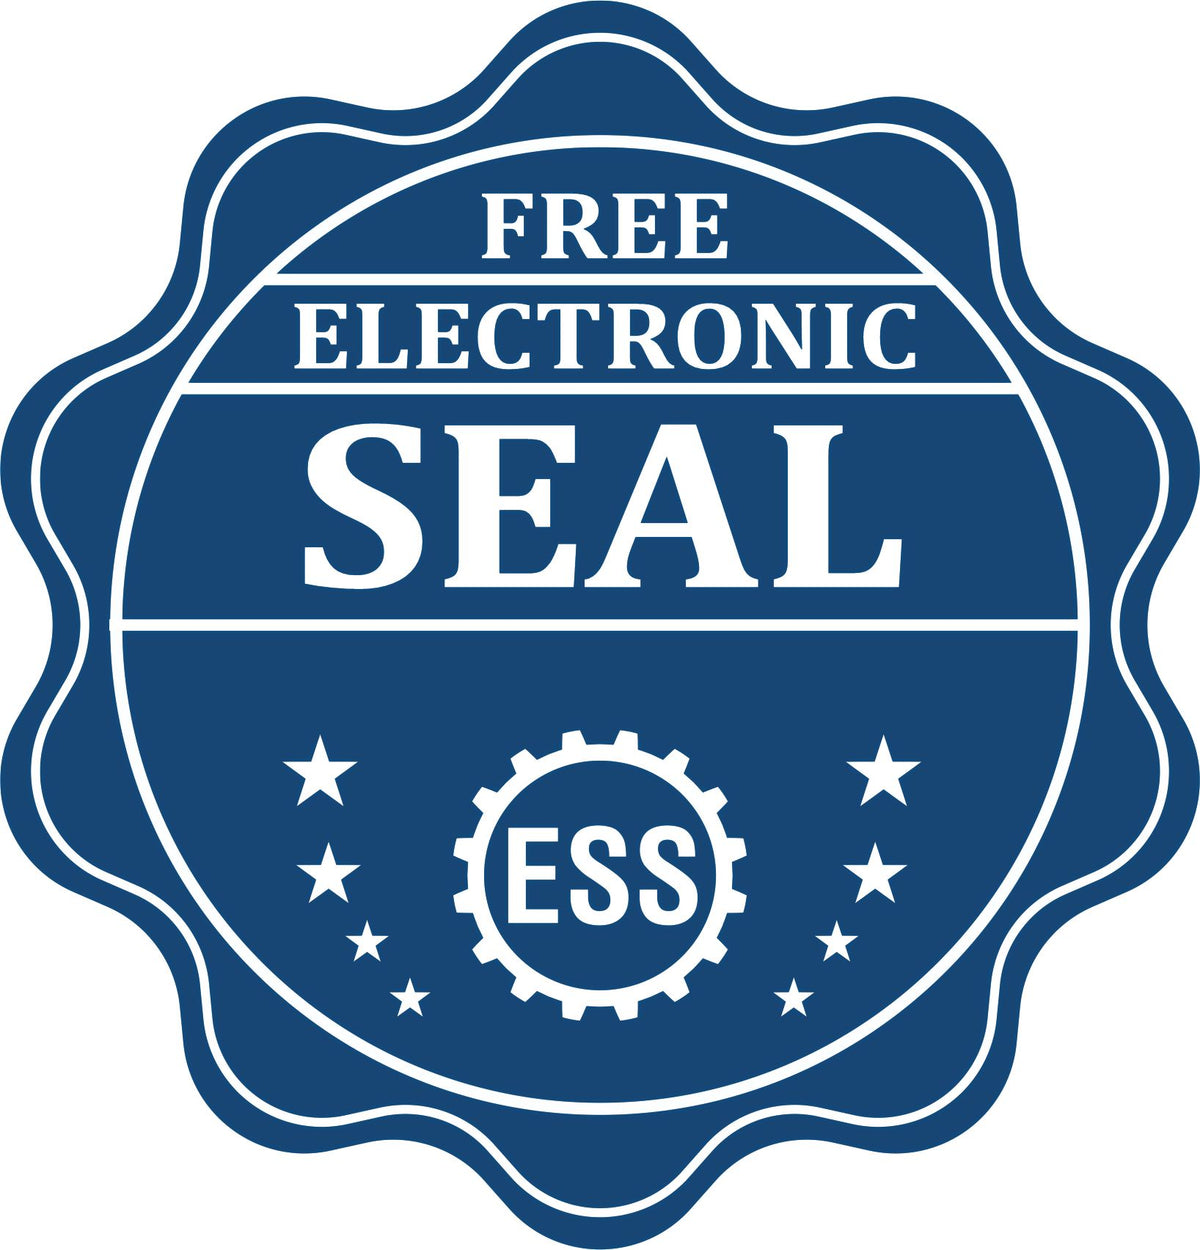 A badge showing a free electronic seal for the Long Reach Delaware Land Surveyor Seal with stars and the ESS gear on the emblem.